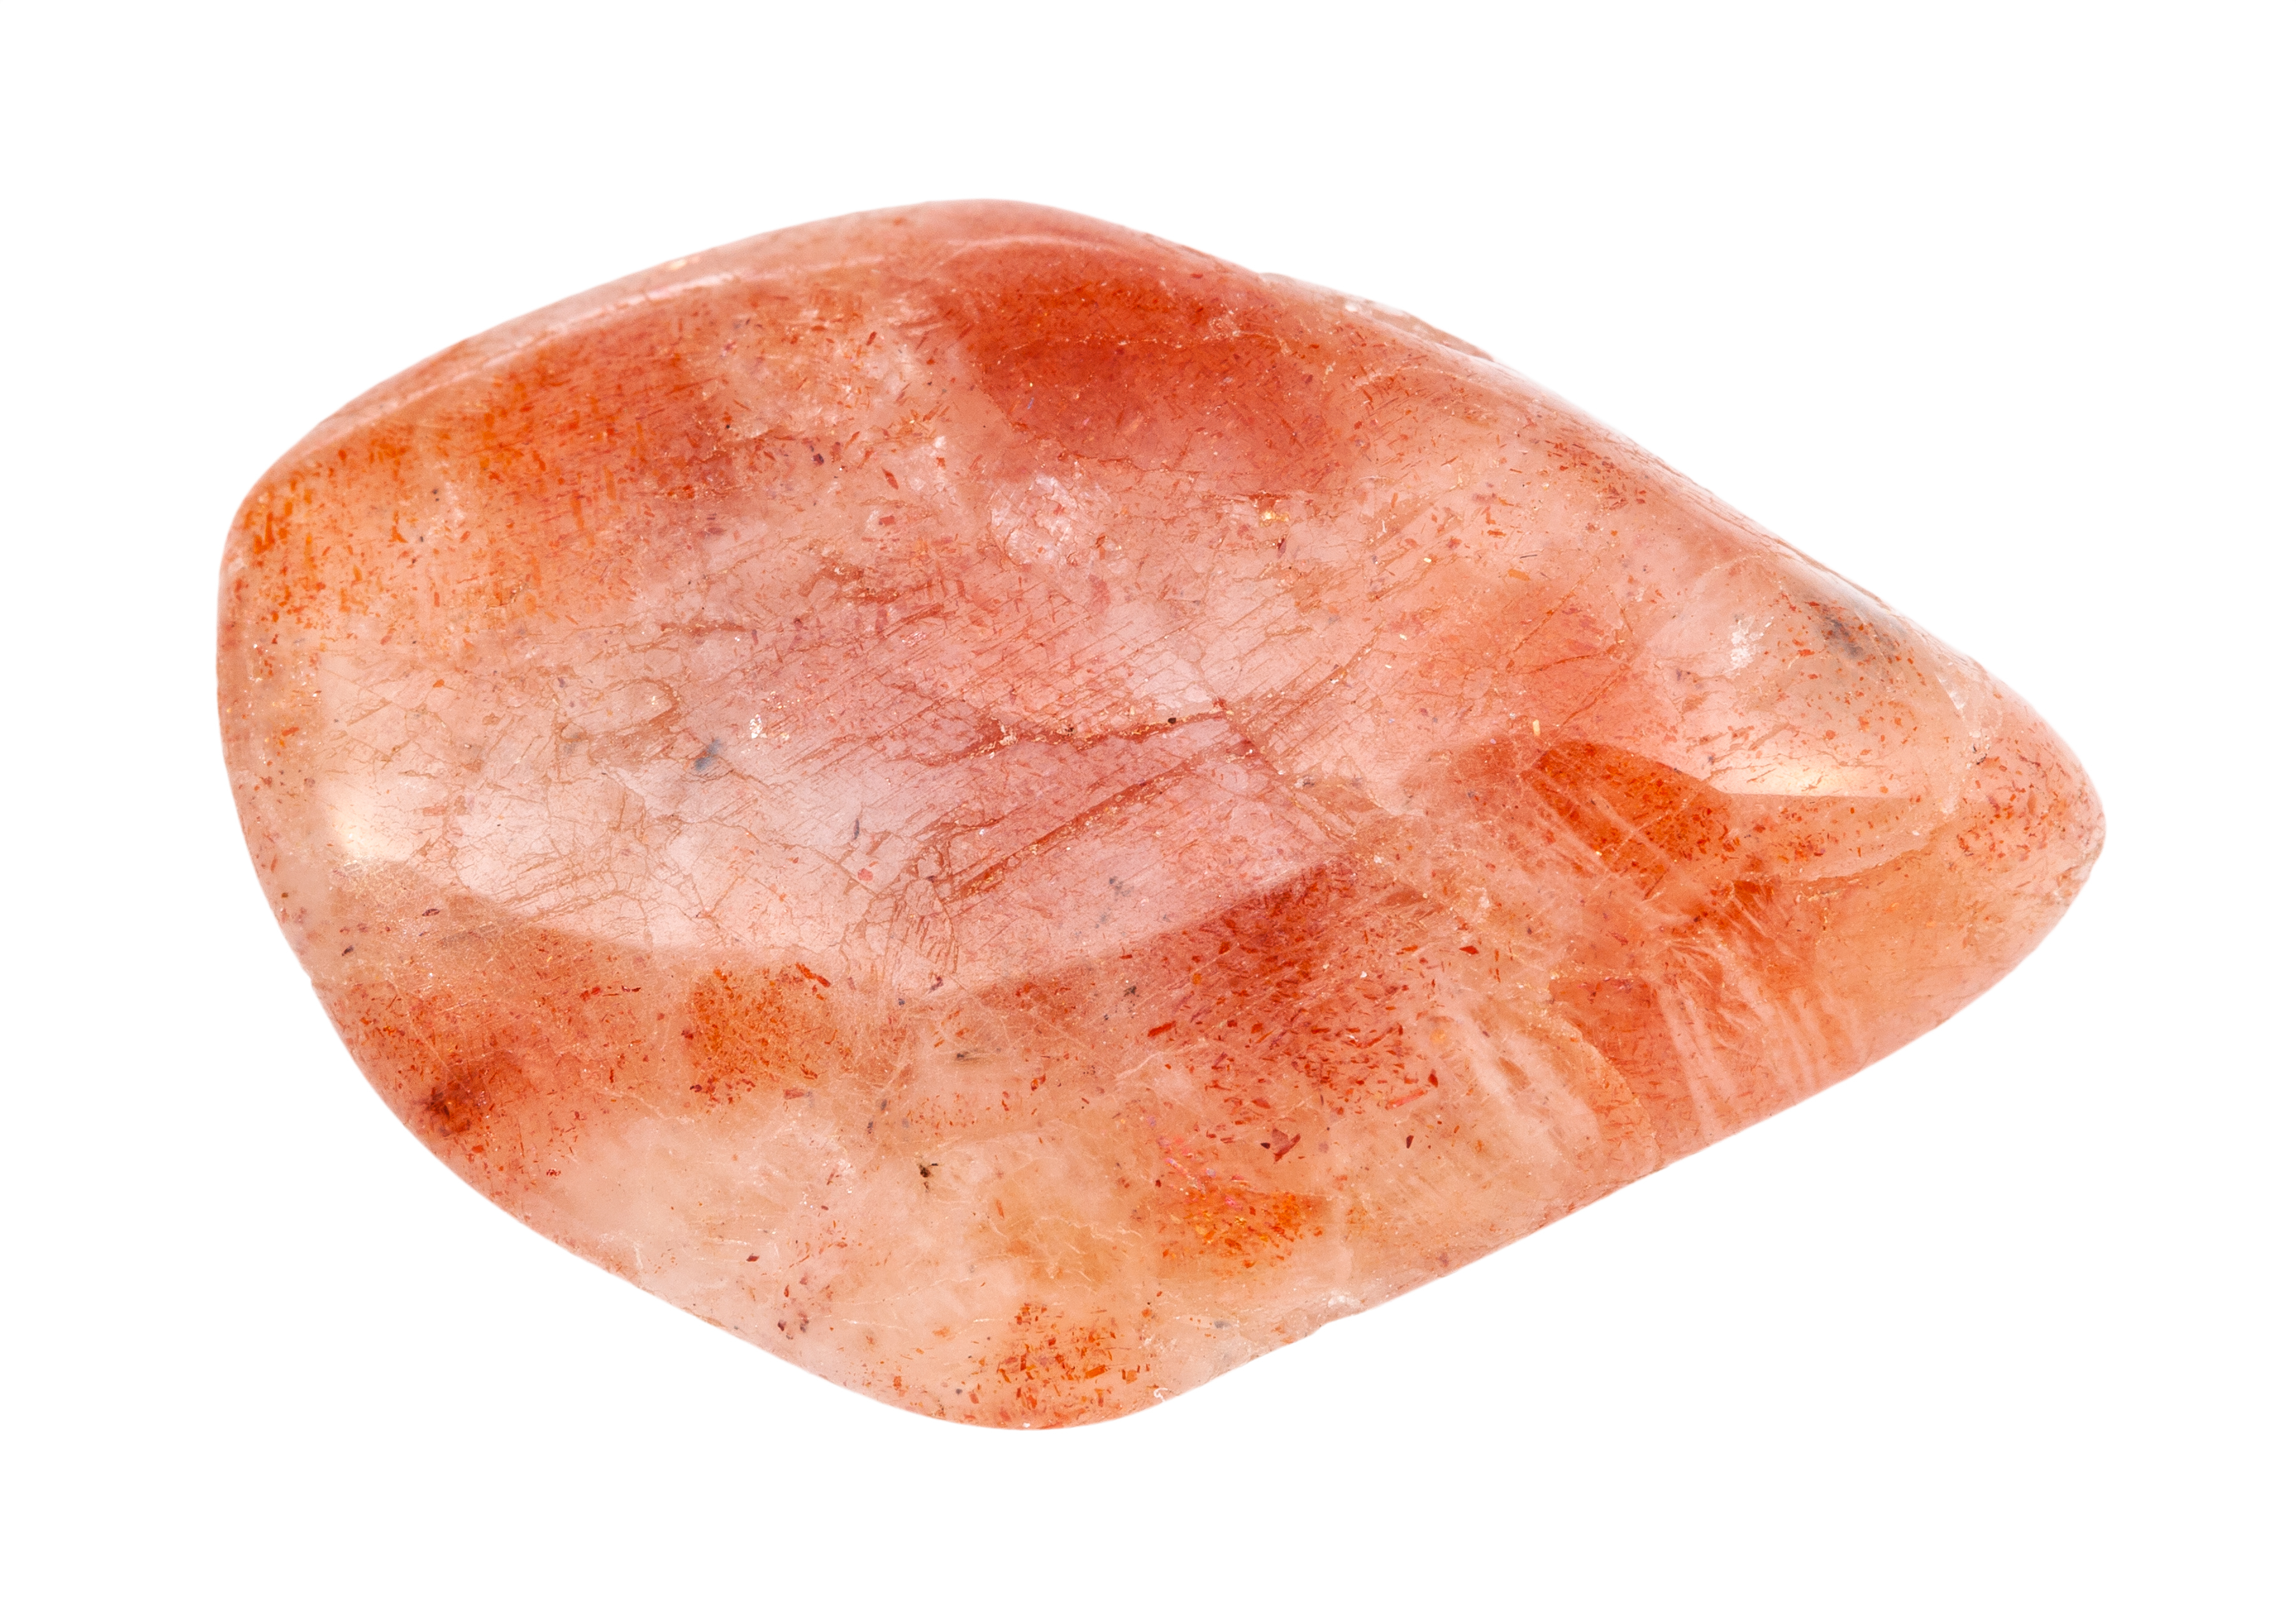 A piece of Sunstone on a white background